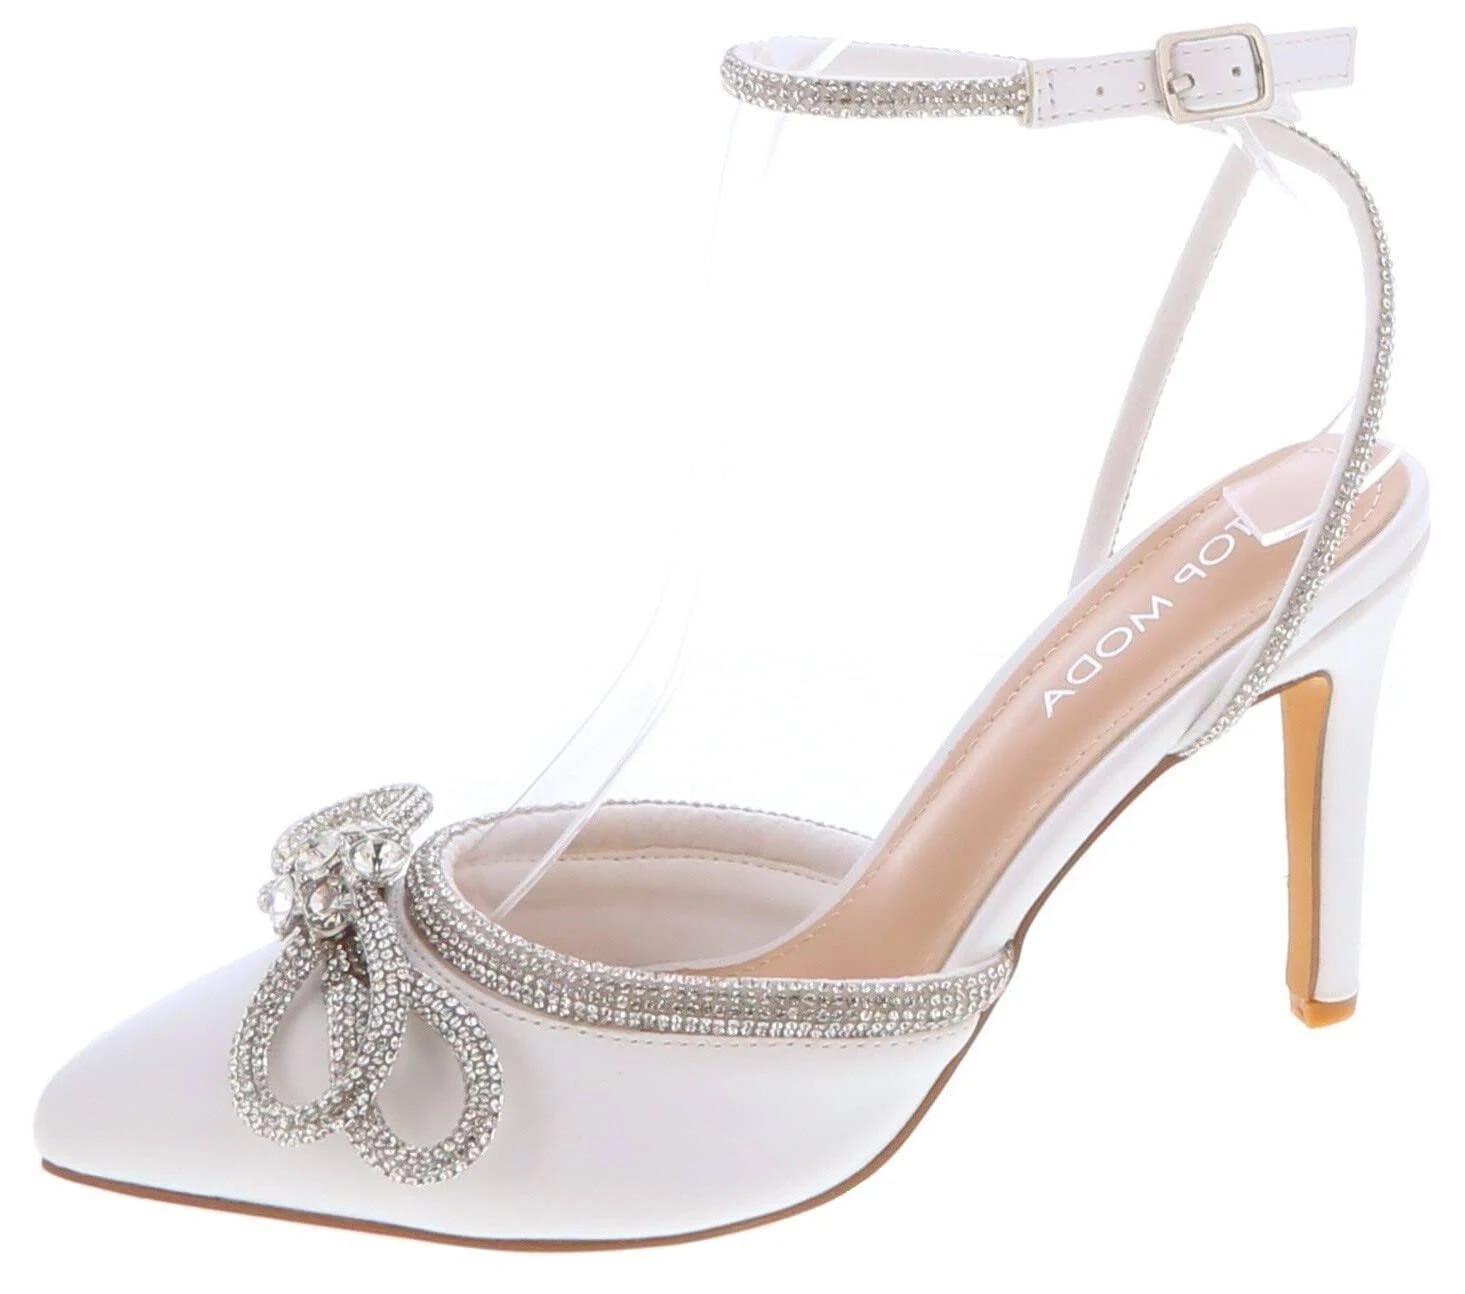 High-Style Rhinestone Embellished Heels for Special Events | Image